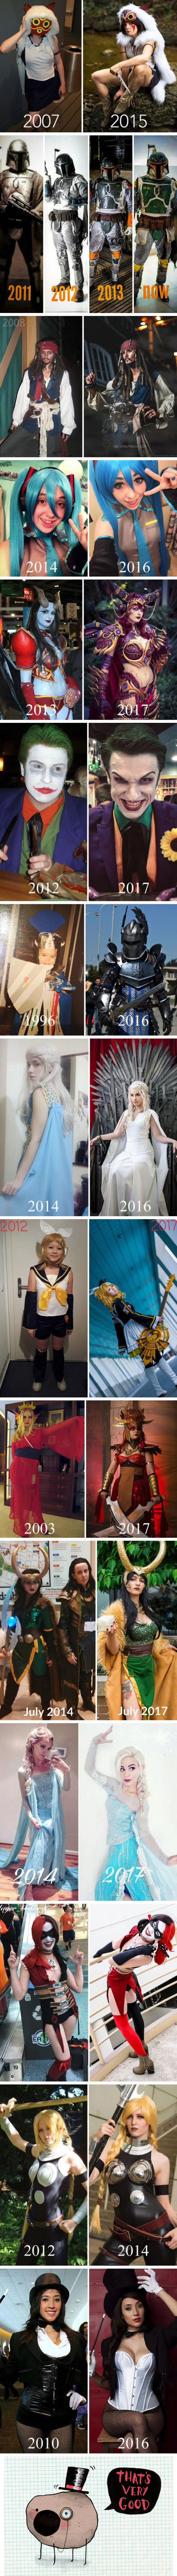 Cosplays Are Sharing Their Outfits Throughout The Years